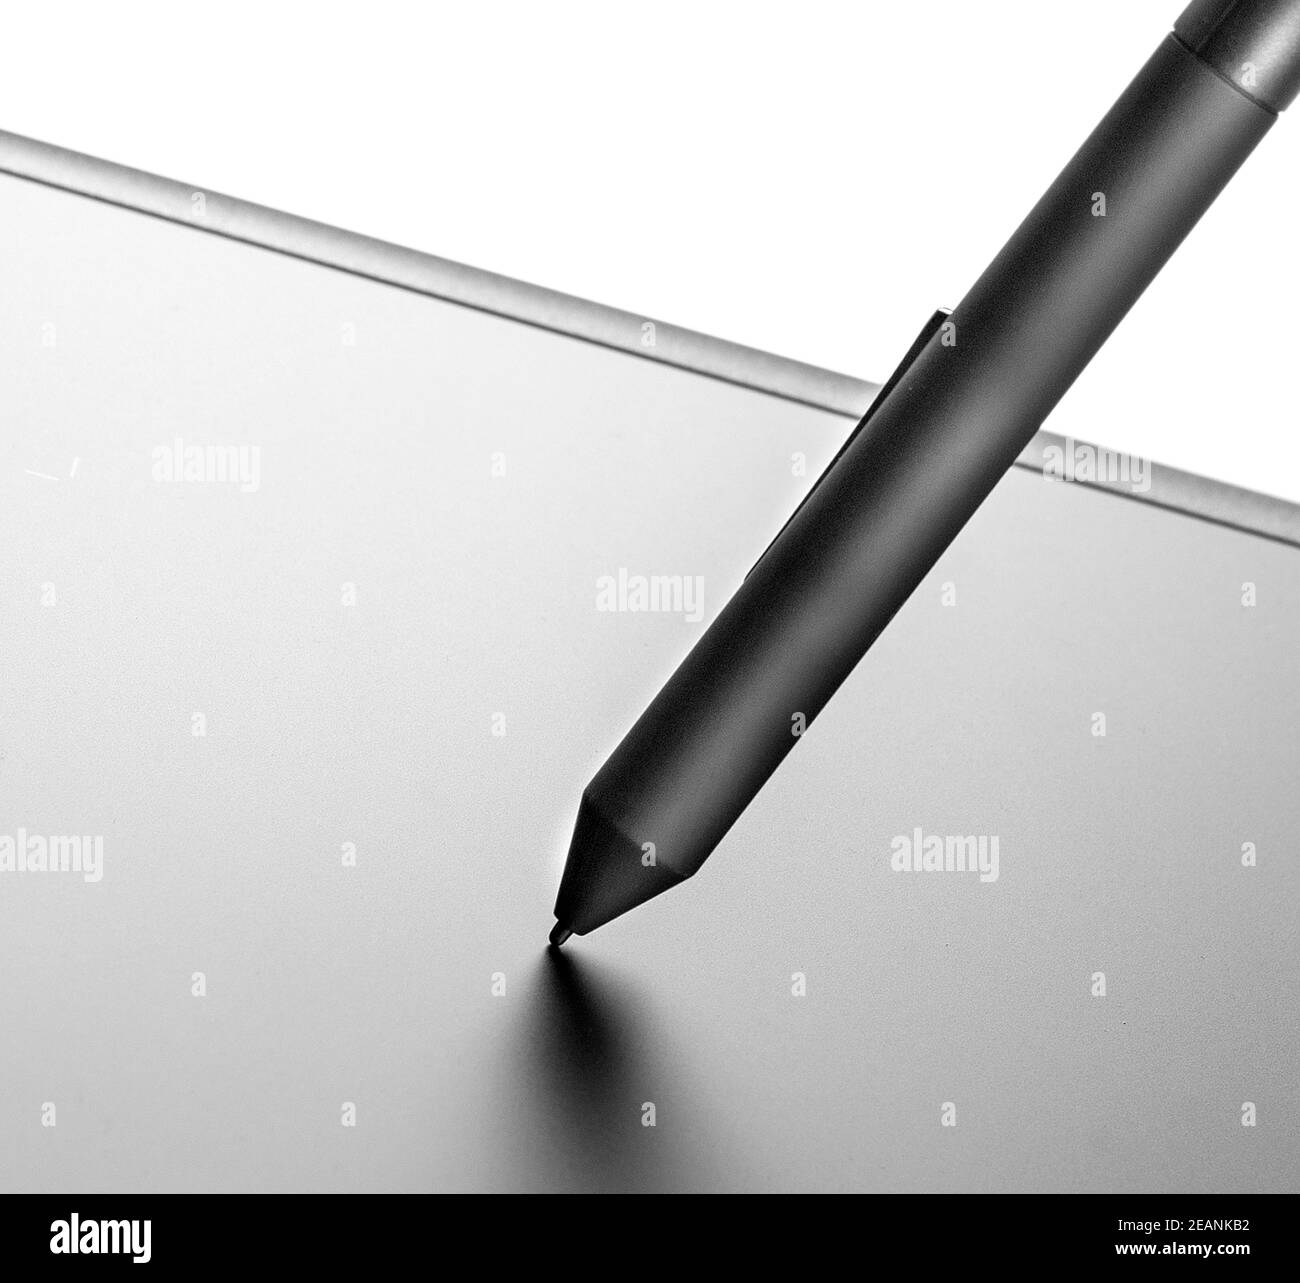 The graphic tablet with the black pencil on white background Stock Photo